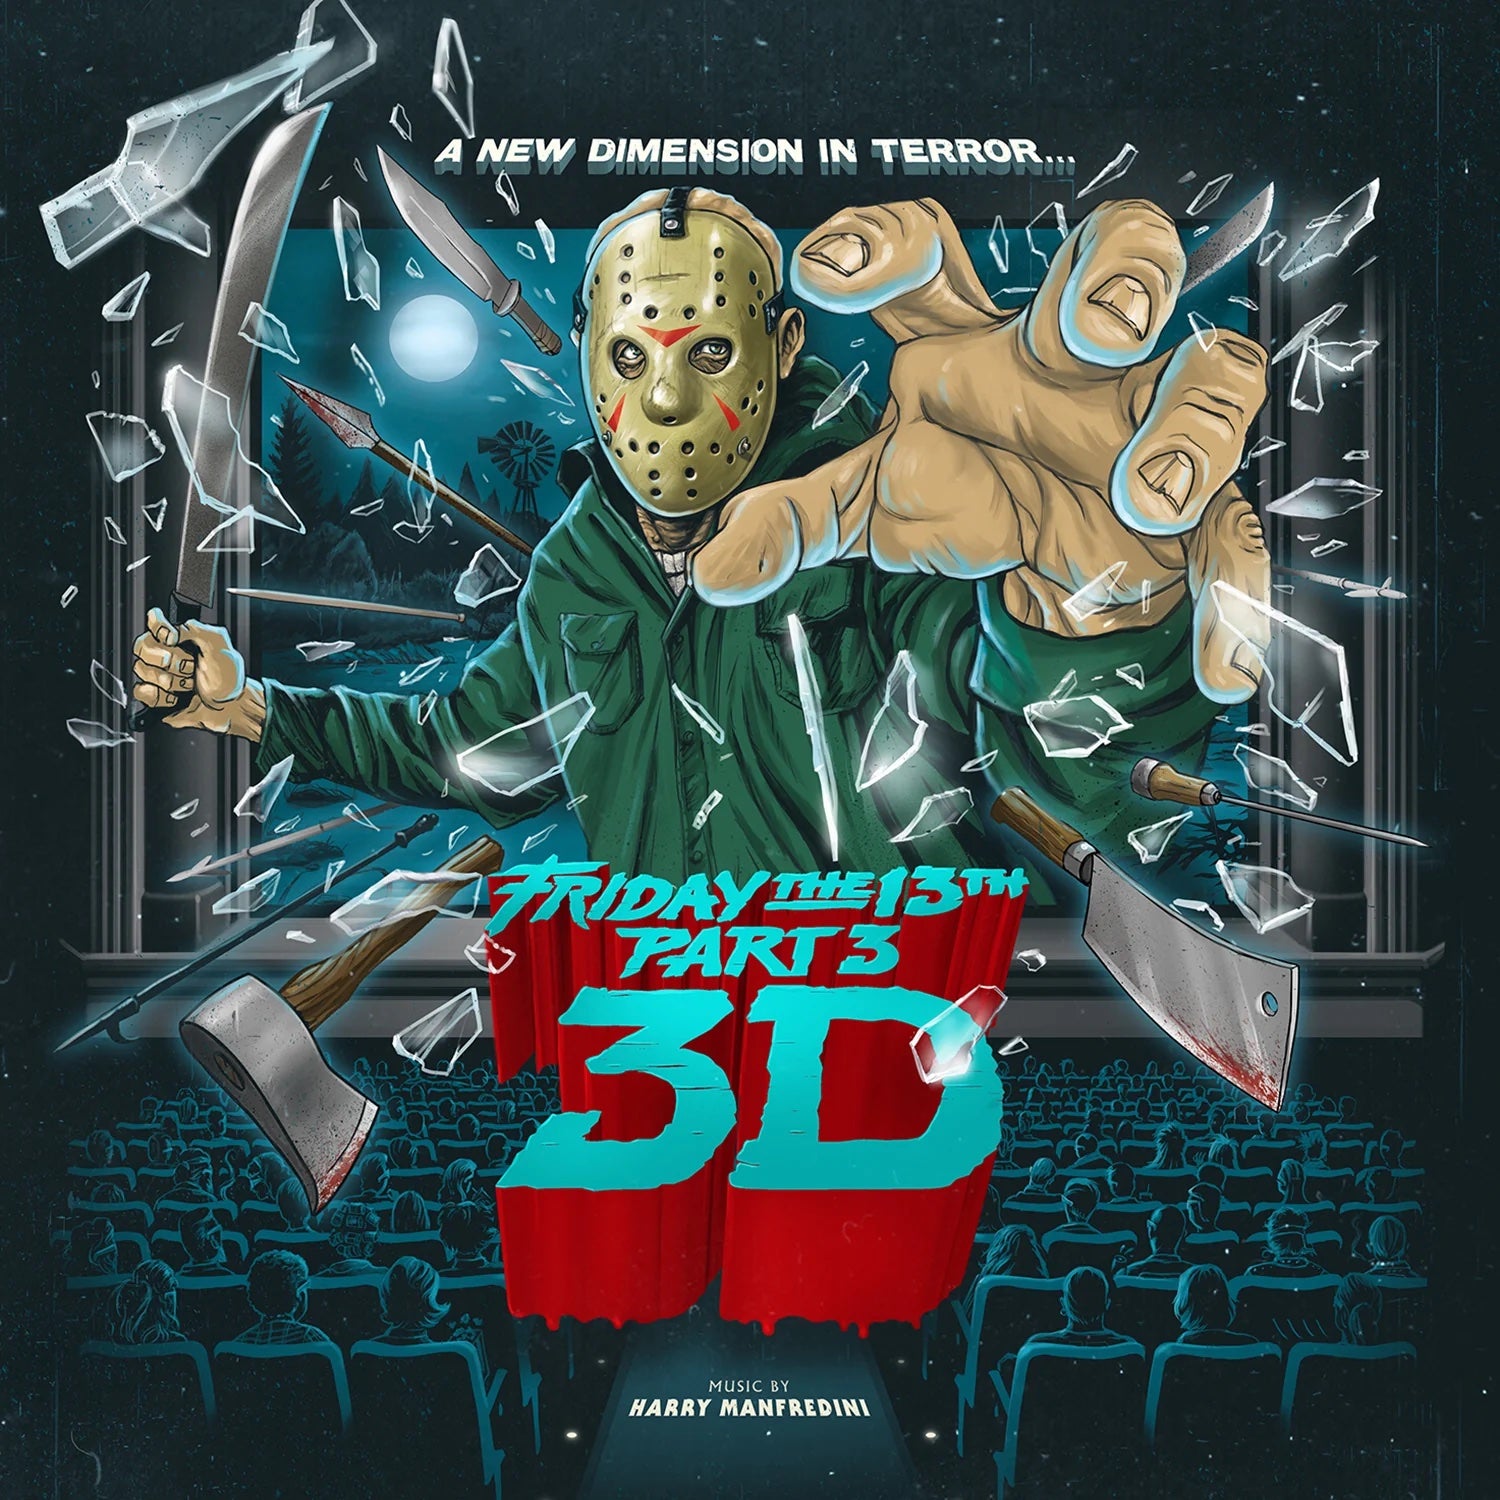 Harry Manfredini - Friday the 13th Part 3 [3D Lenticular Cover]